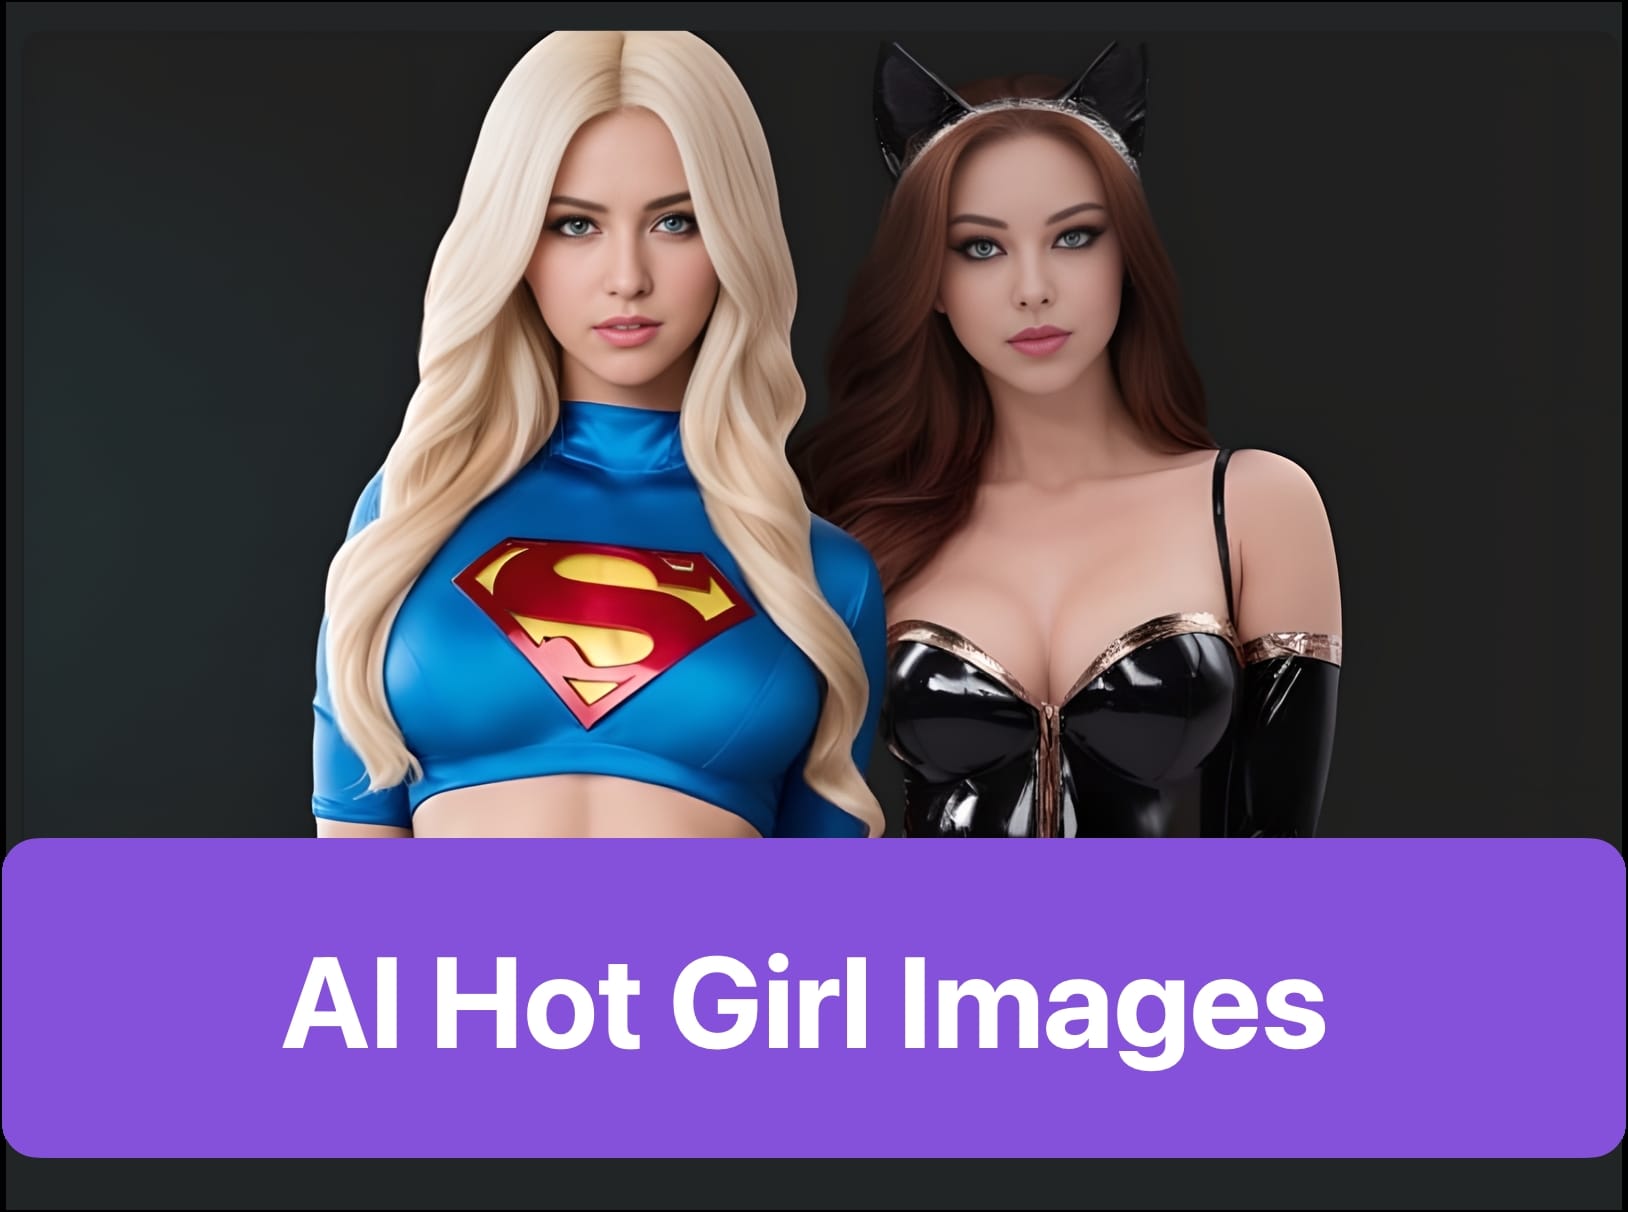 AI Hot Girl Images: Create Your Own with AI